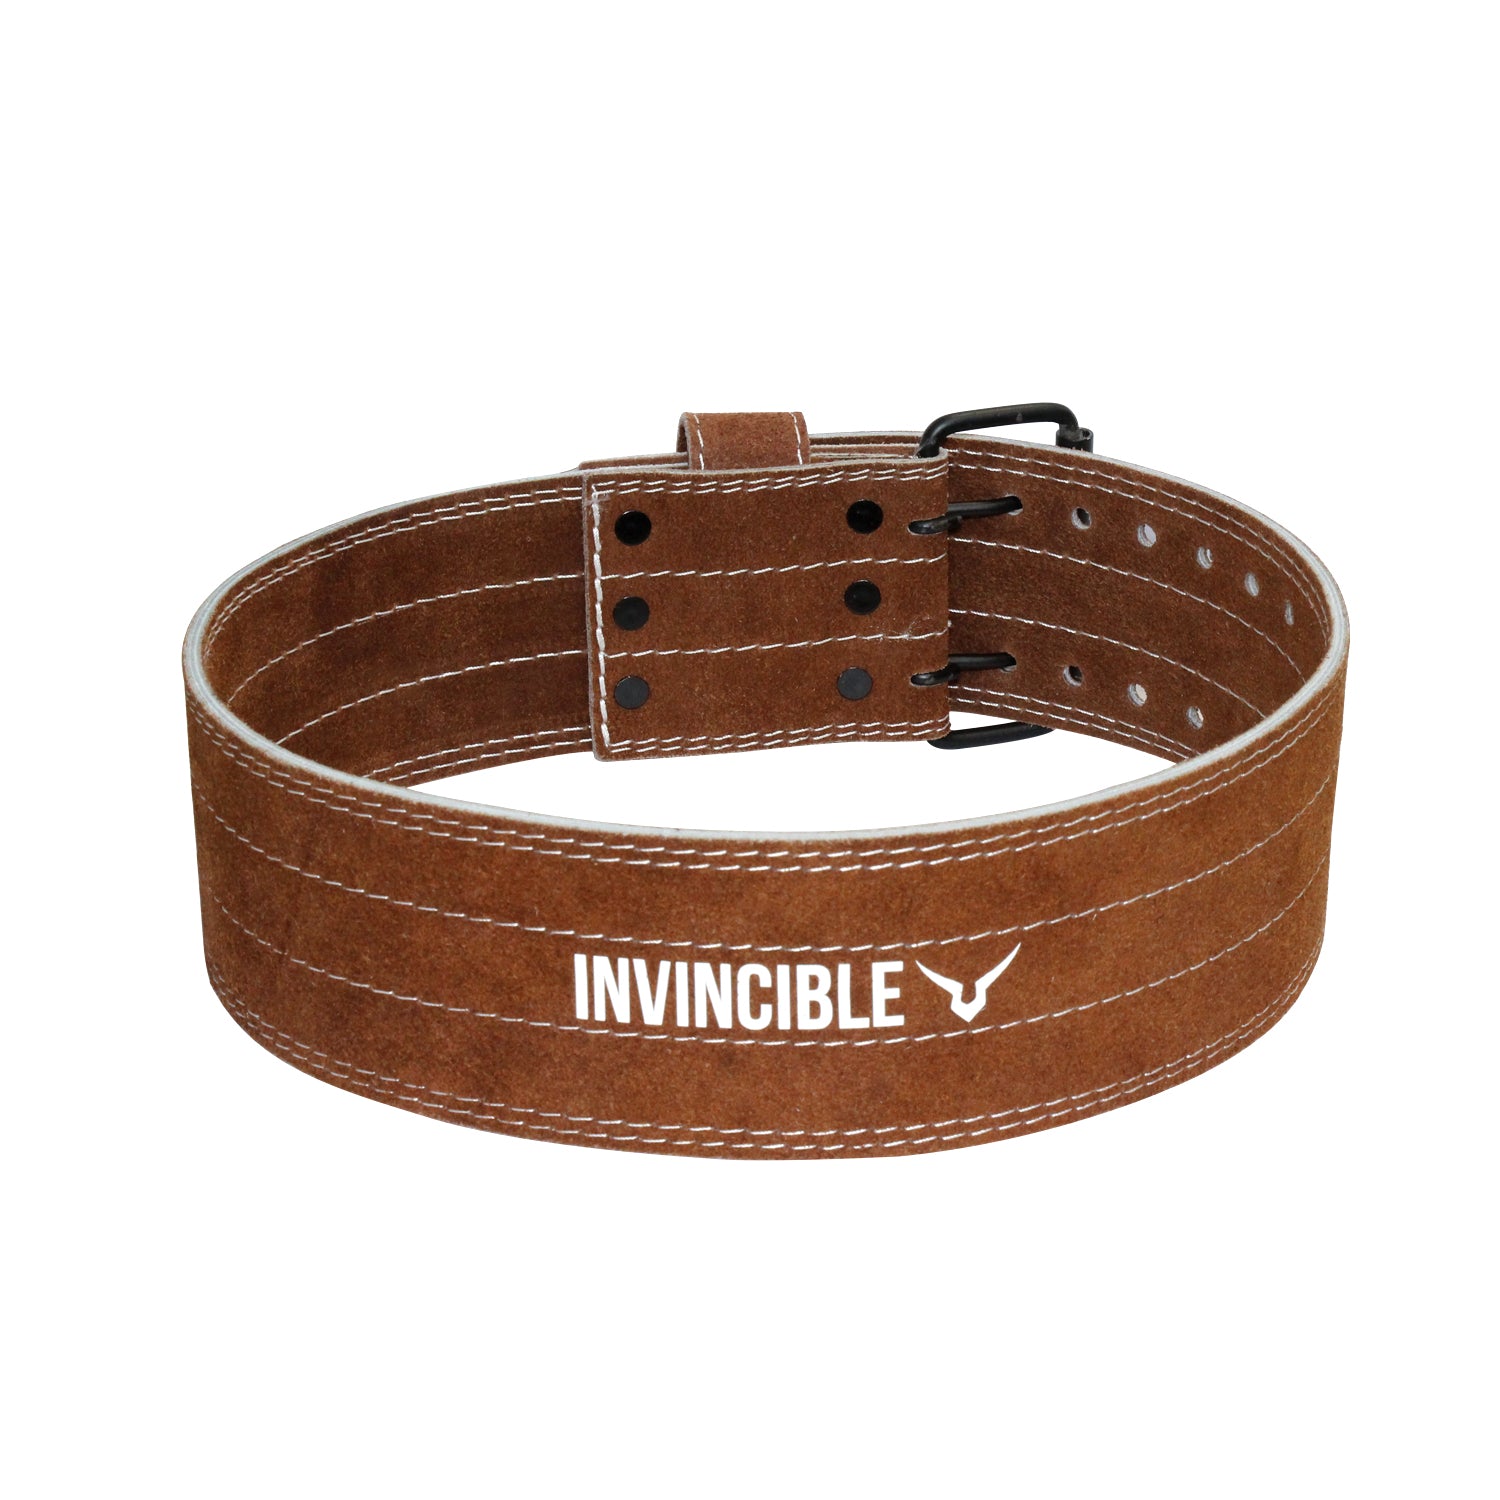 Invincible Heavy Duty Leather Weight Lifting Gym Belt for Heavy Workout for Men & Women 4"